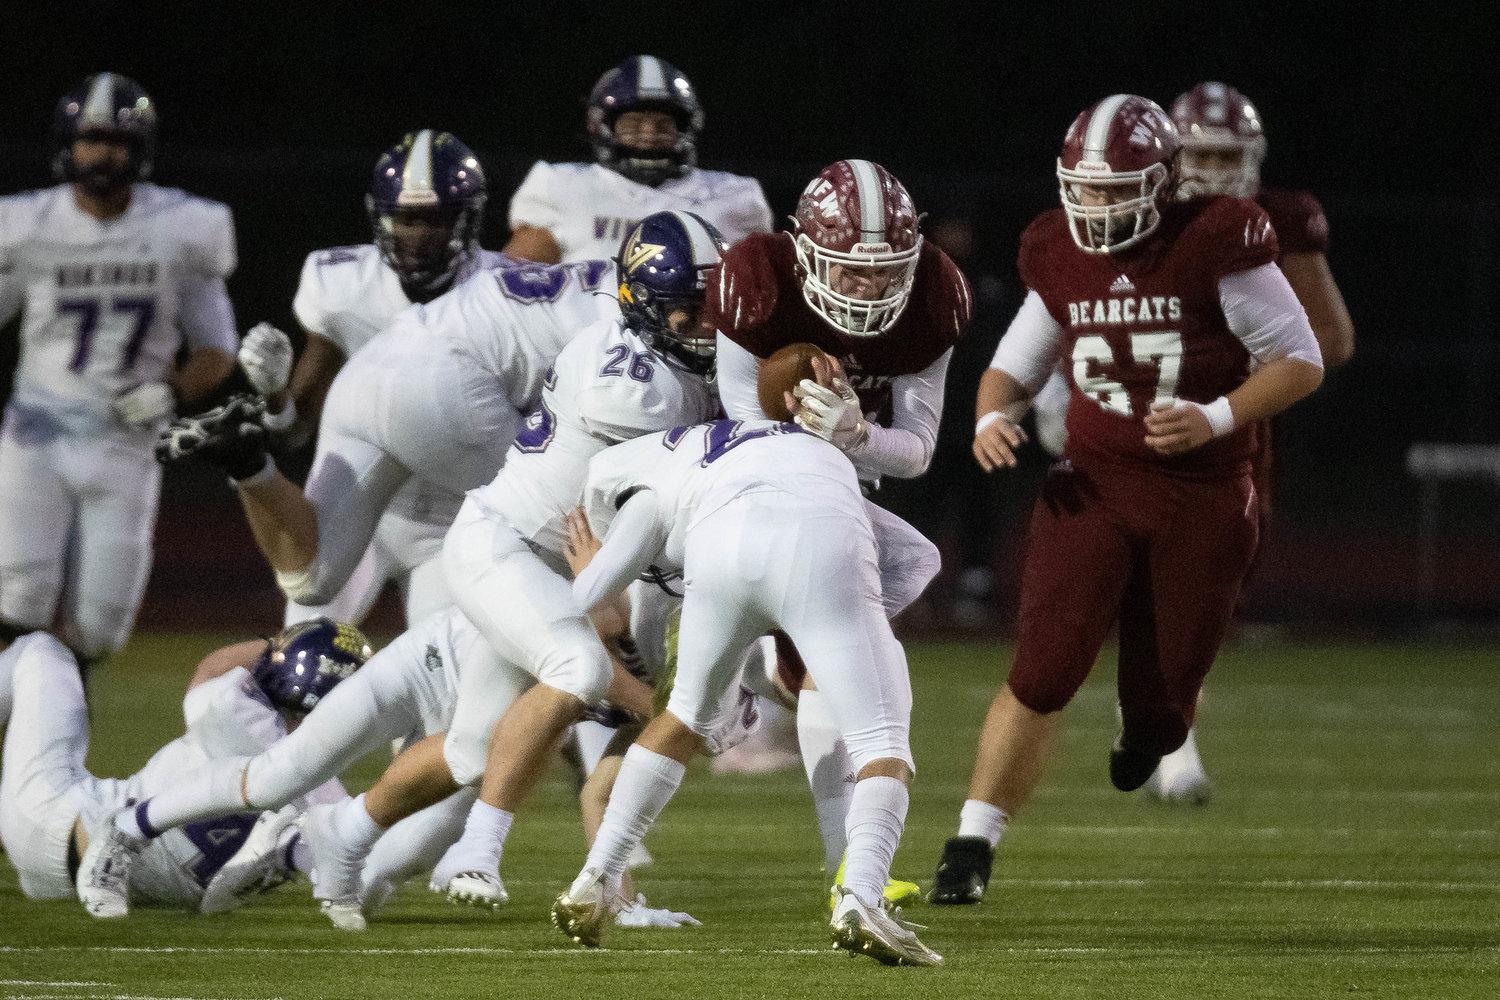 W.F. West quarterback Gavin Fugate is bottled up by defenders against North Kitsap in the 2A state semifinals Nov. 26 at Tumwater District Stadium.